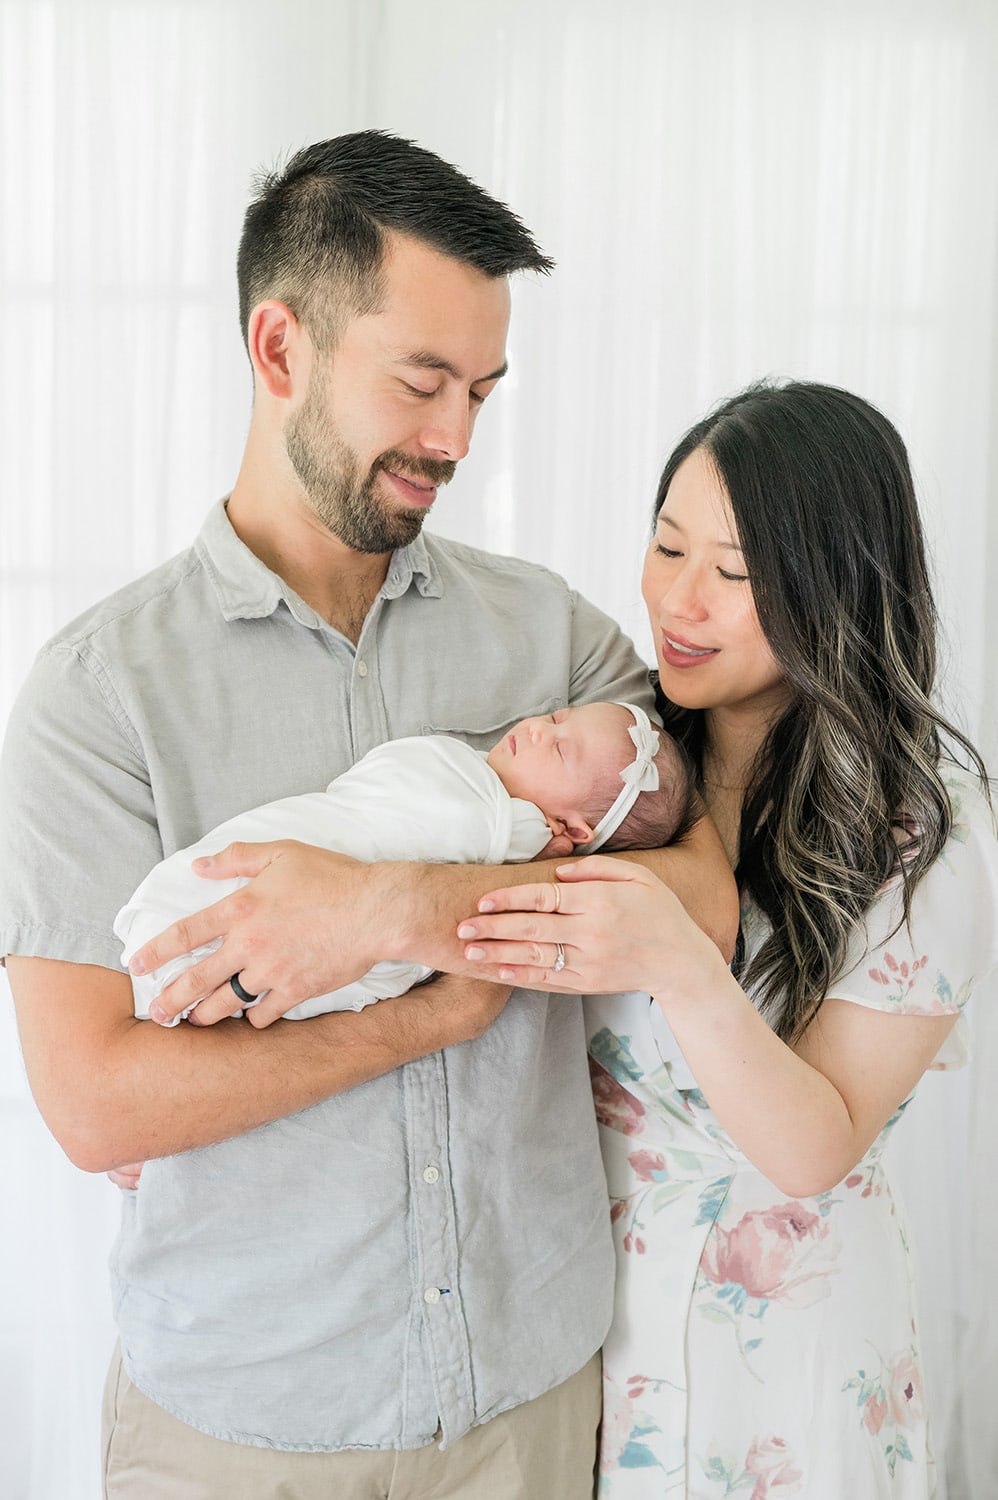 What to expect for your newborn session